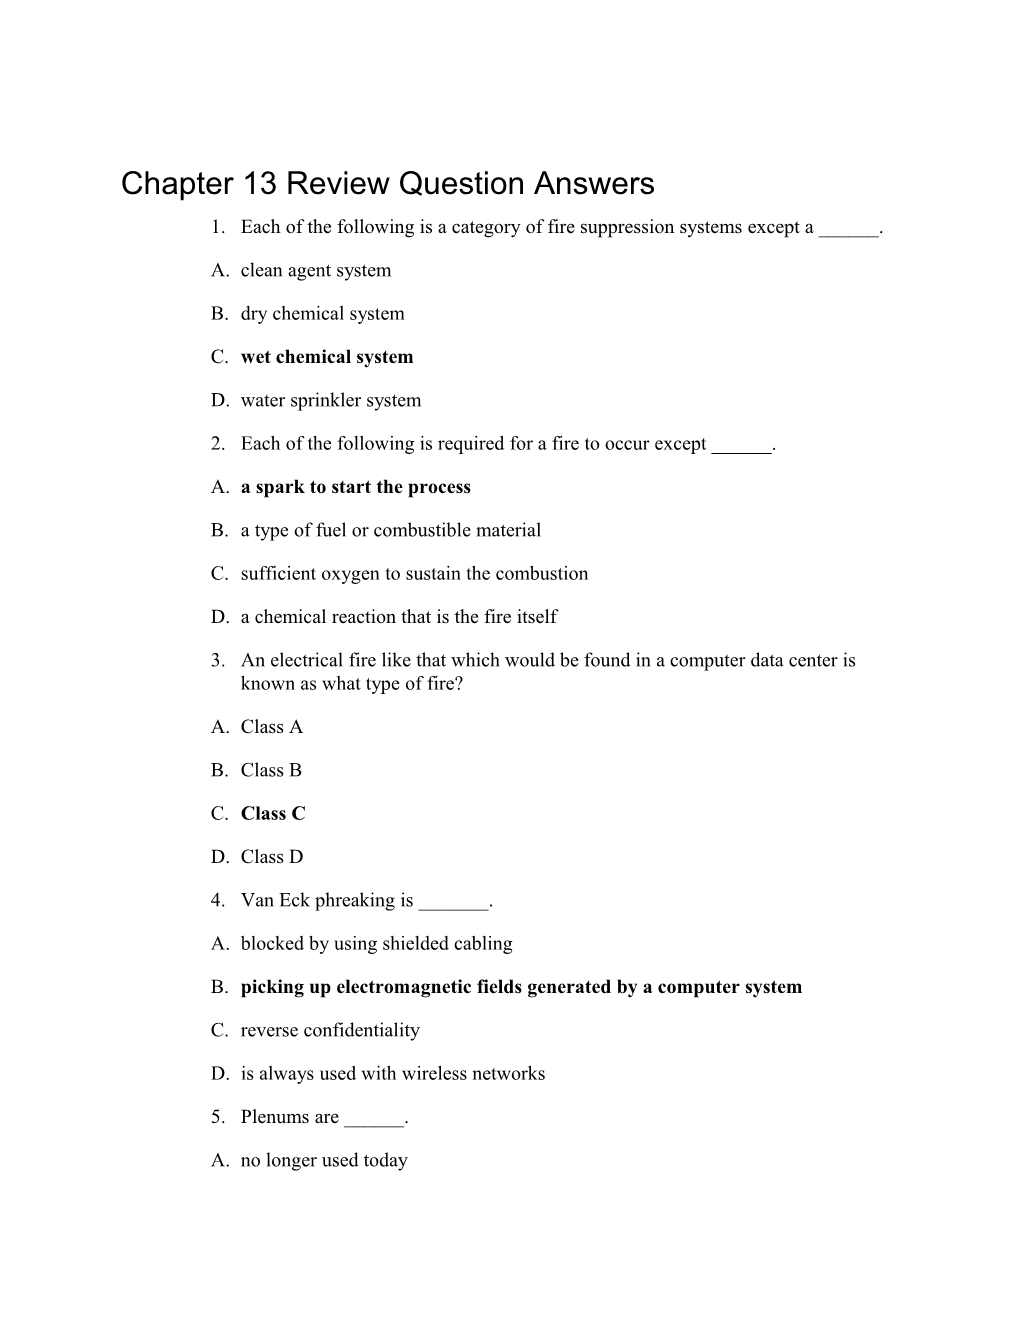 Chapter 13 Review Question Answers